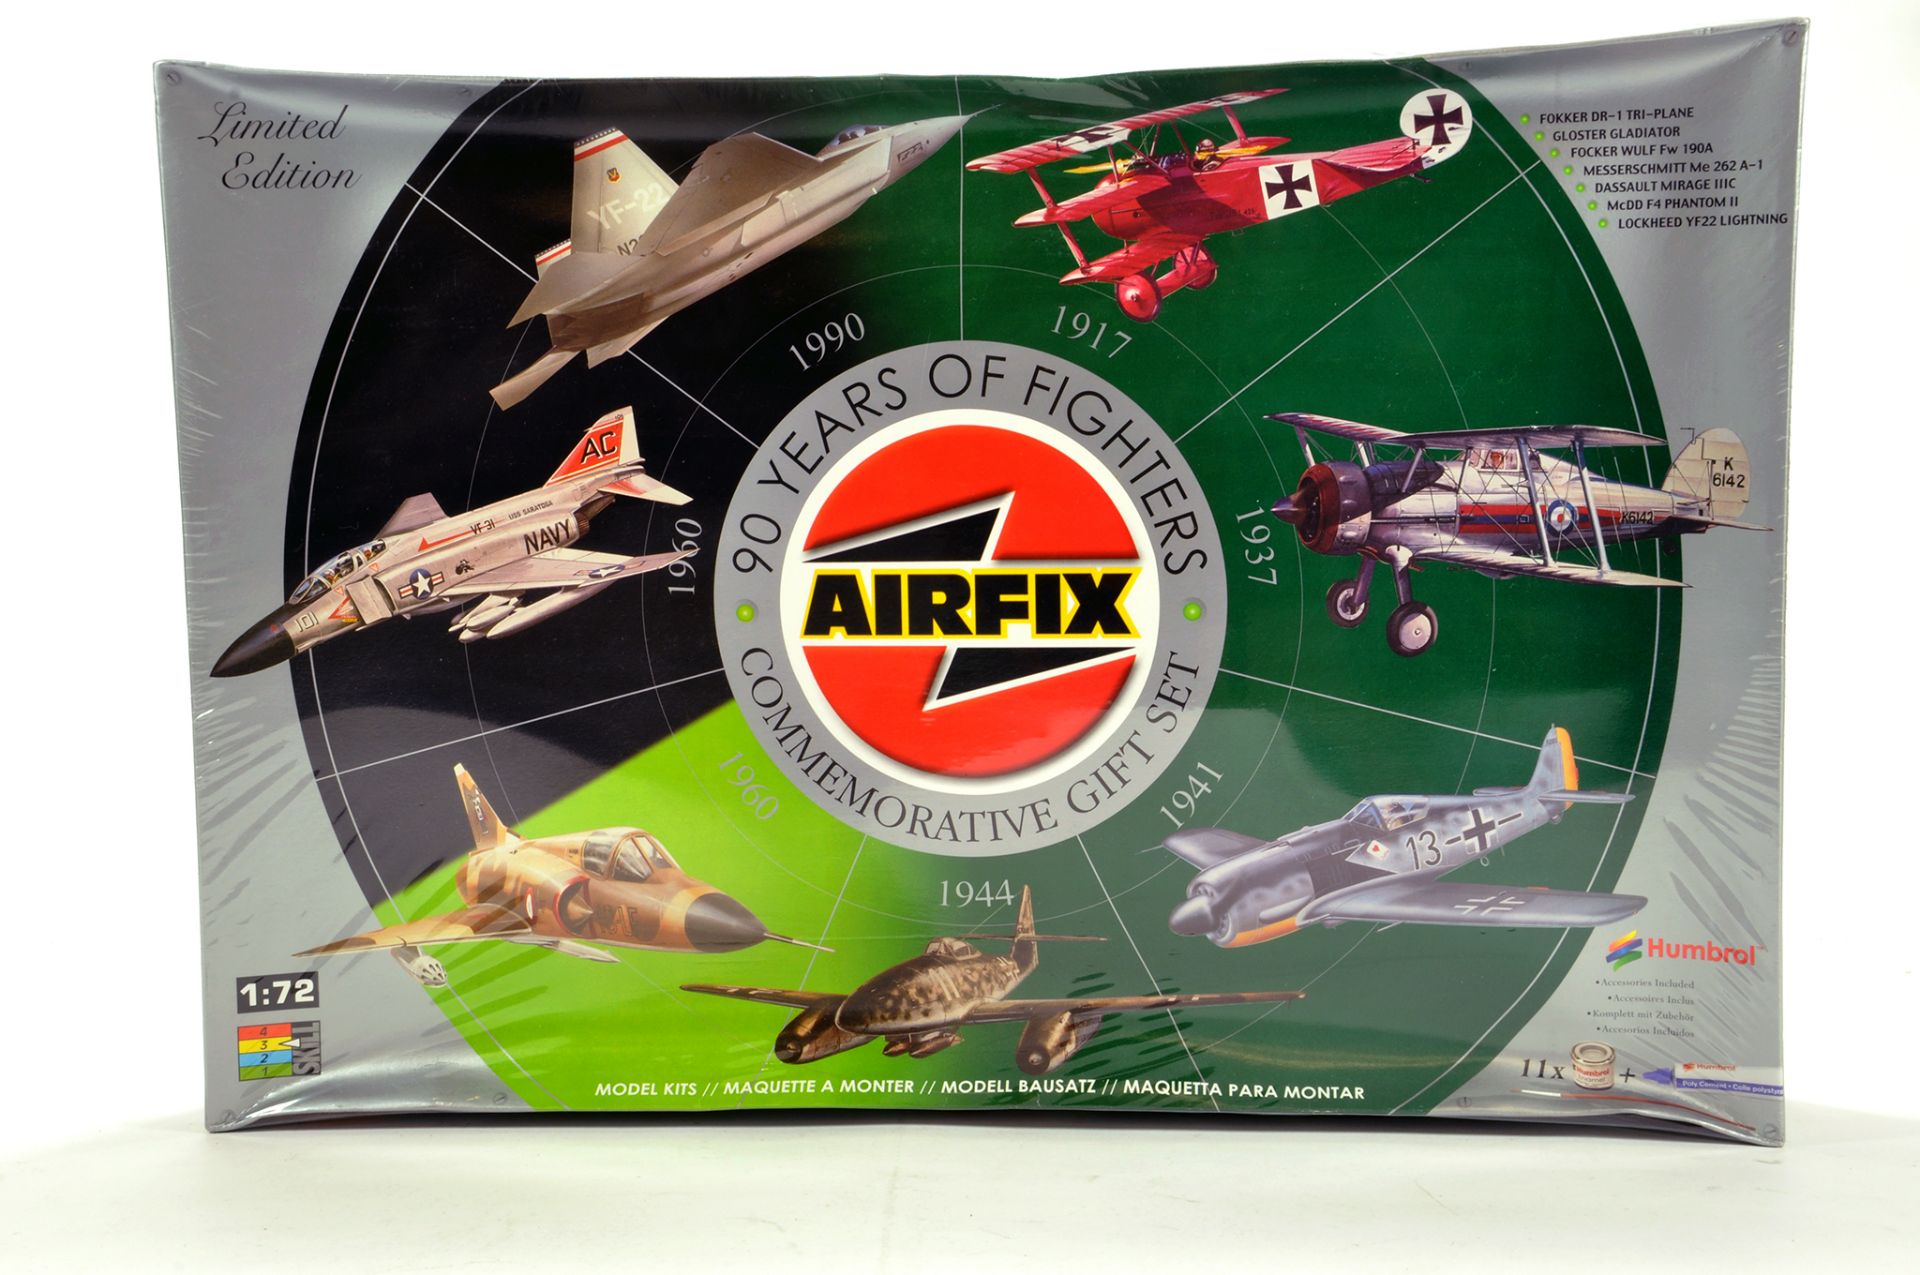 Airfix Plastic model kit in 1/72 comprising 90 Years of Fighters Set. Sealed.